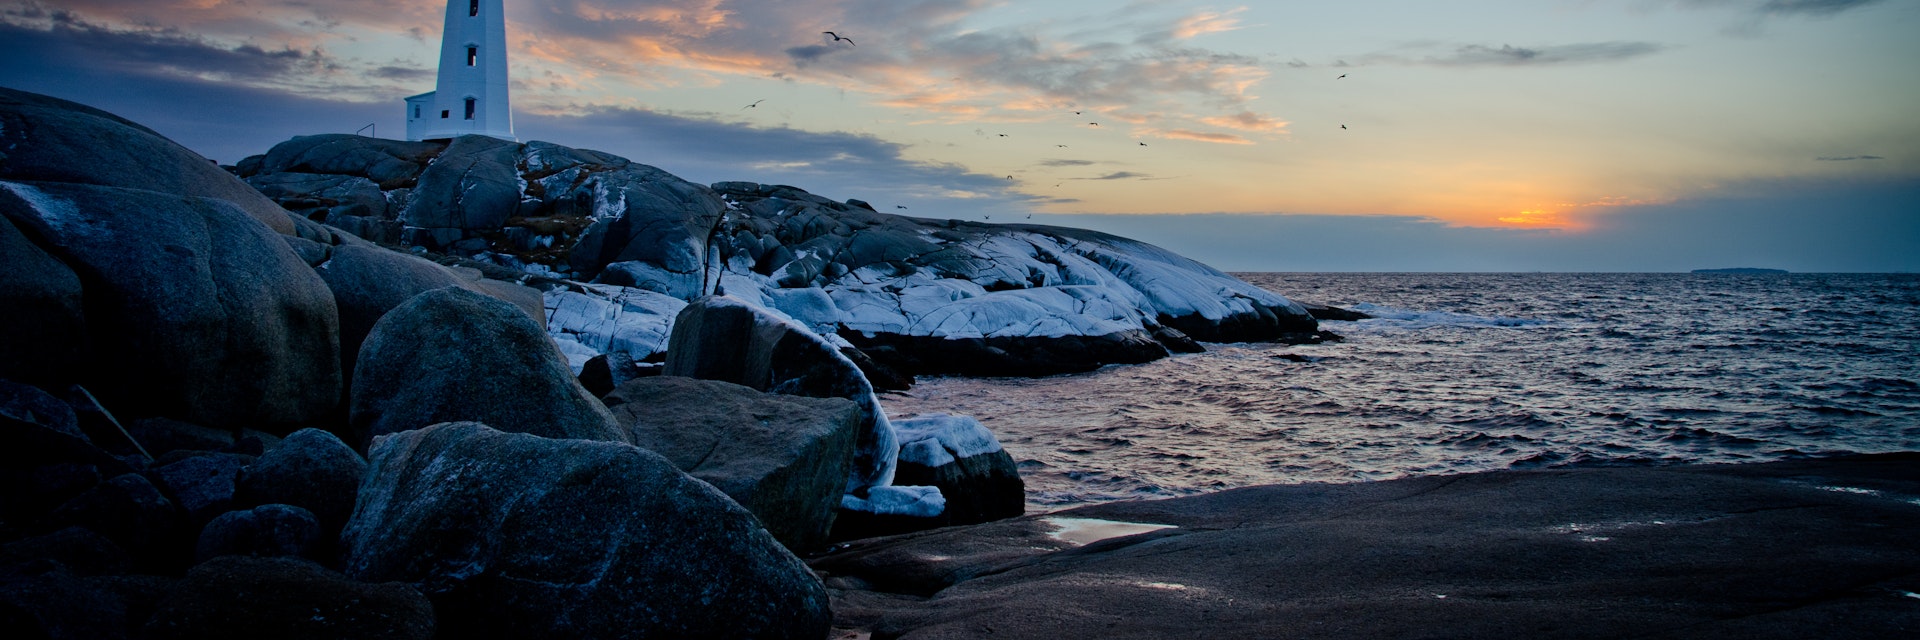 Beautiful spot in Nova Scotia, Canada.  Warm clothes and hot chocolate helped make this shot possible!